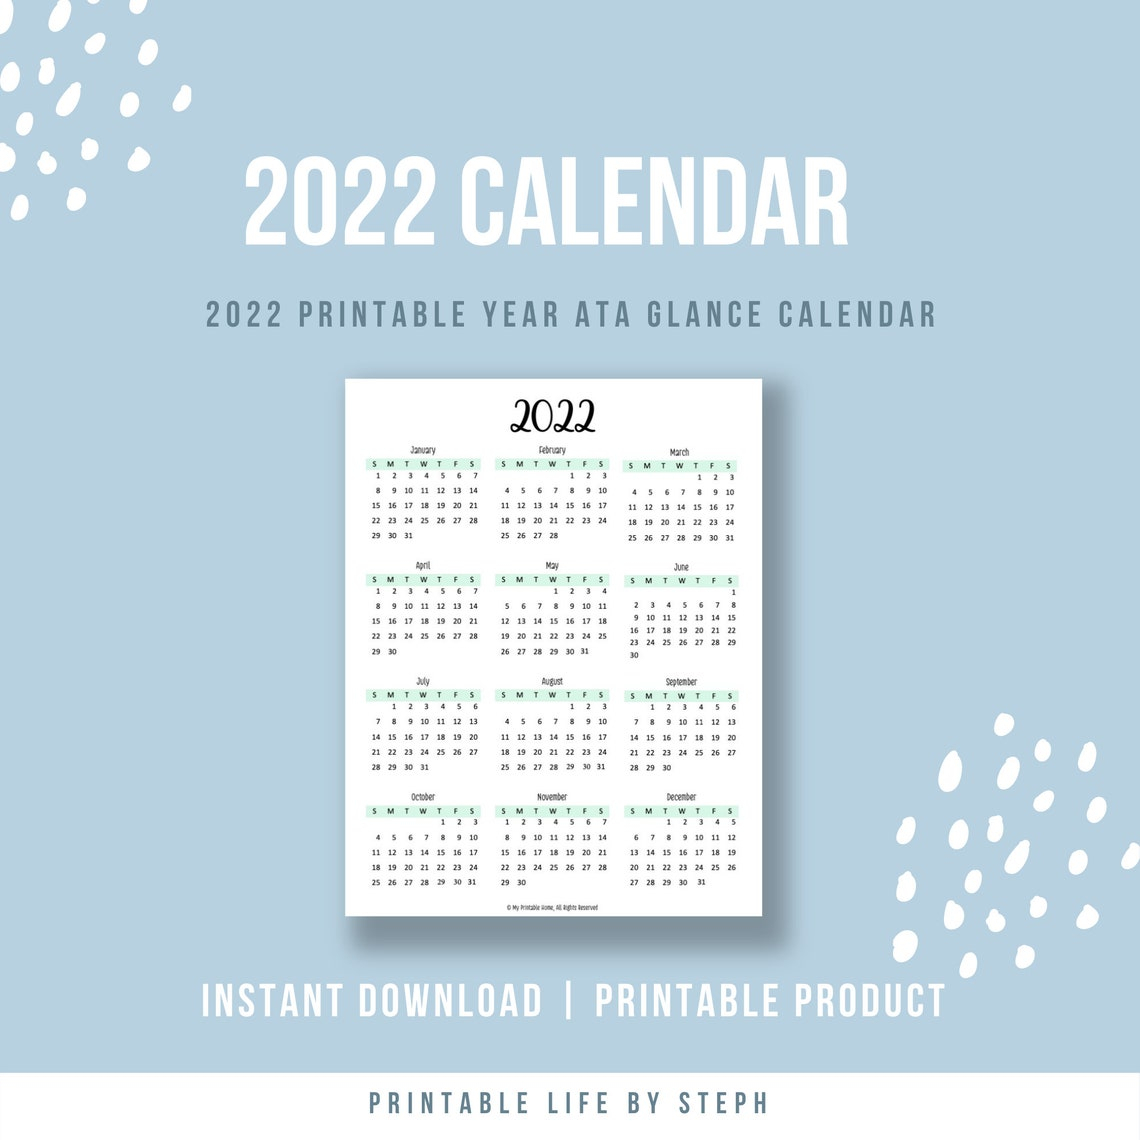 2022 Printable Year At A Glance Calendar Yearly Planner | Etsy for Year At A Glance Calendar 2022